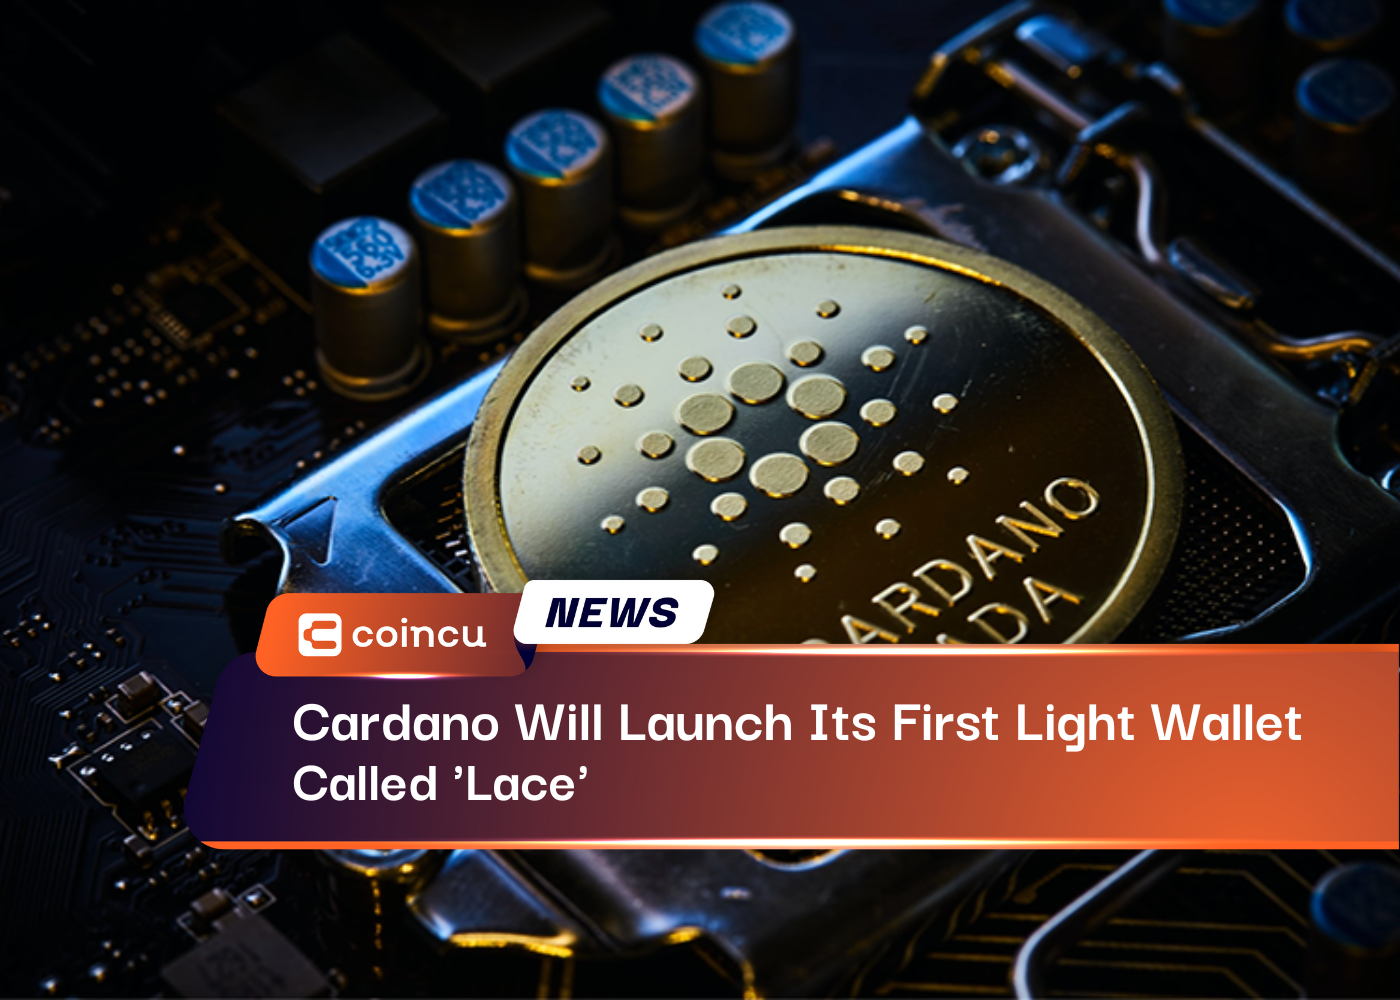 Cardano Will Launch Its First Light Wallet Called ‘Lace’